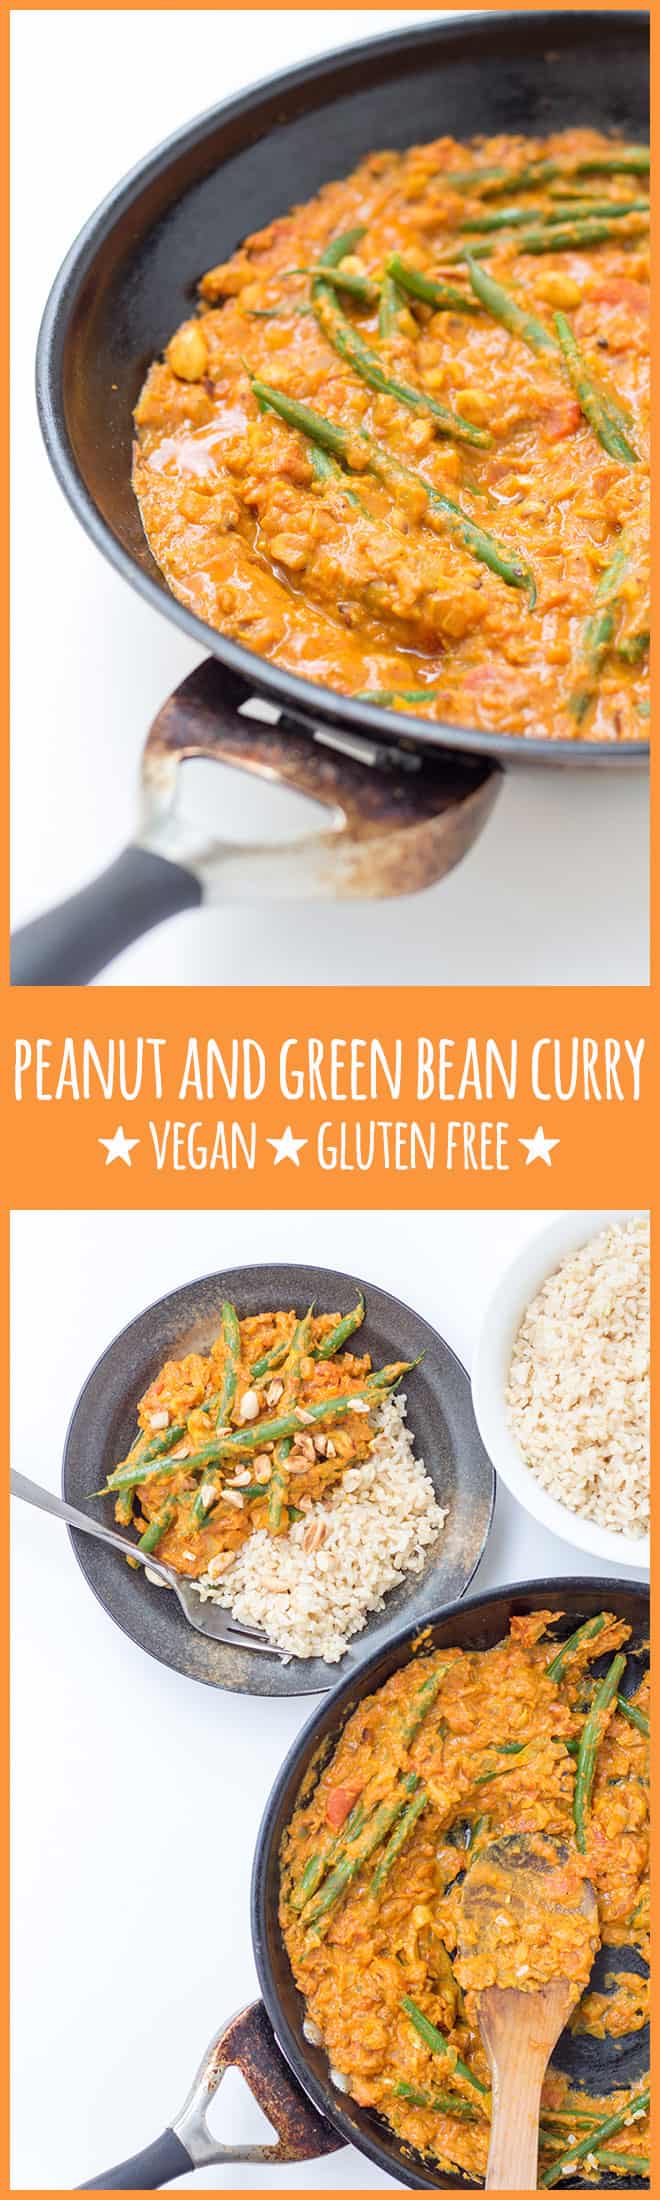 This spicy peanut and green bean curry is simple food done well. Incredibly tasty and satisfying, this is one of those recipes whose whole is greater than the sum of its parts.